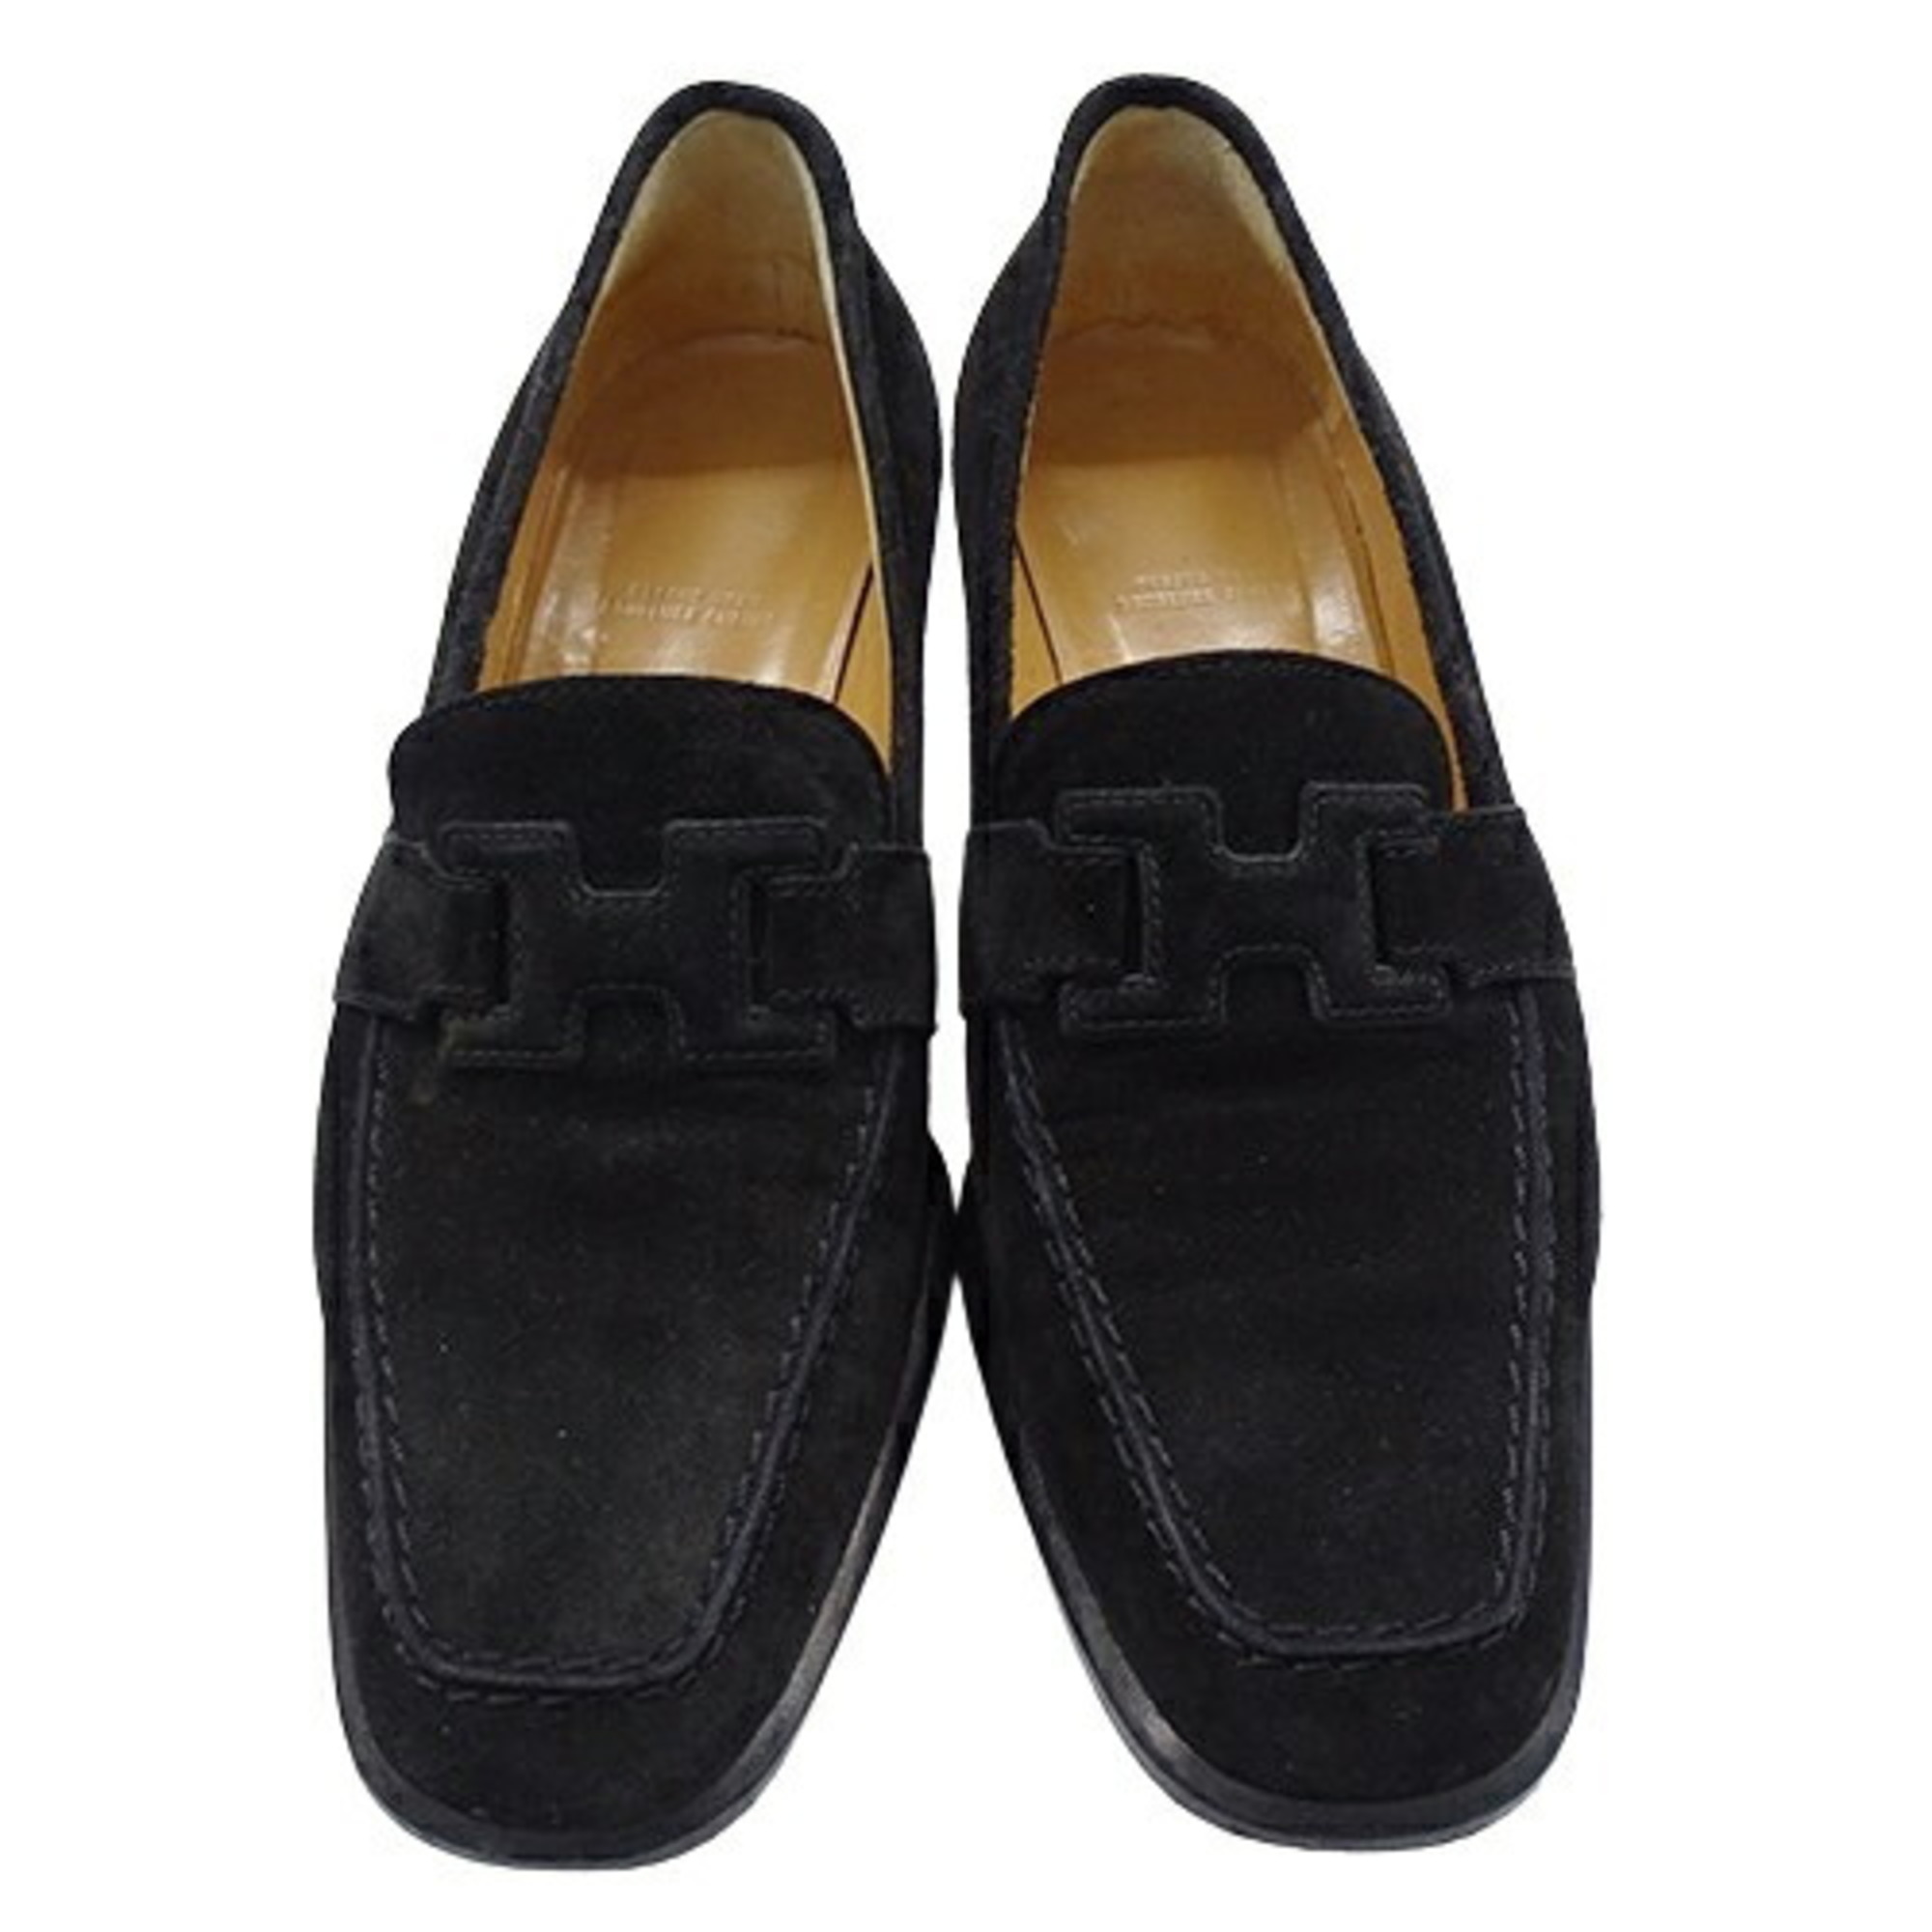 HERMES Shoes Women's Brand Loafer Suede Black #36 Approx. 23cm H Logo